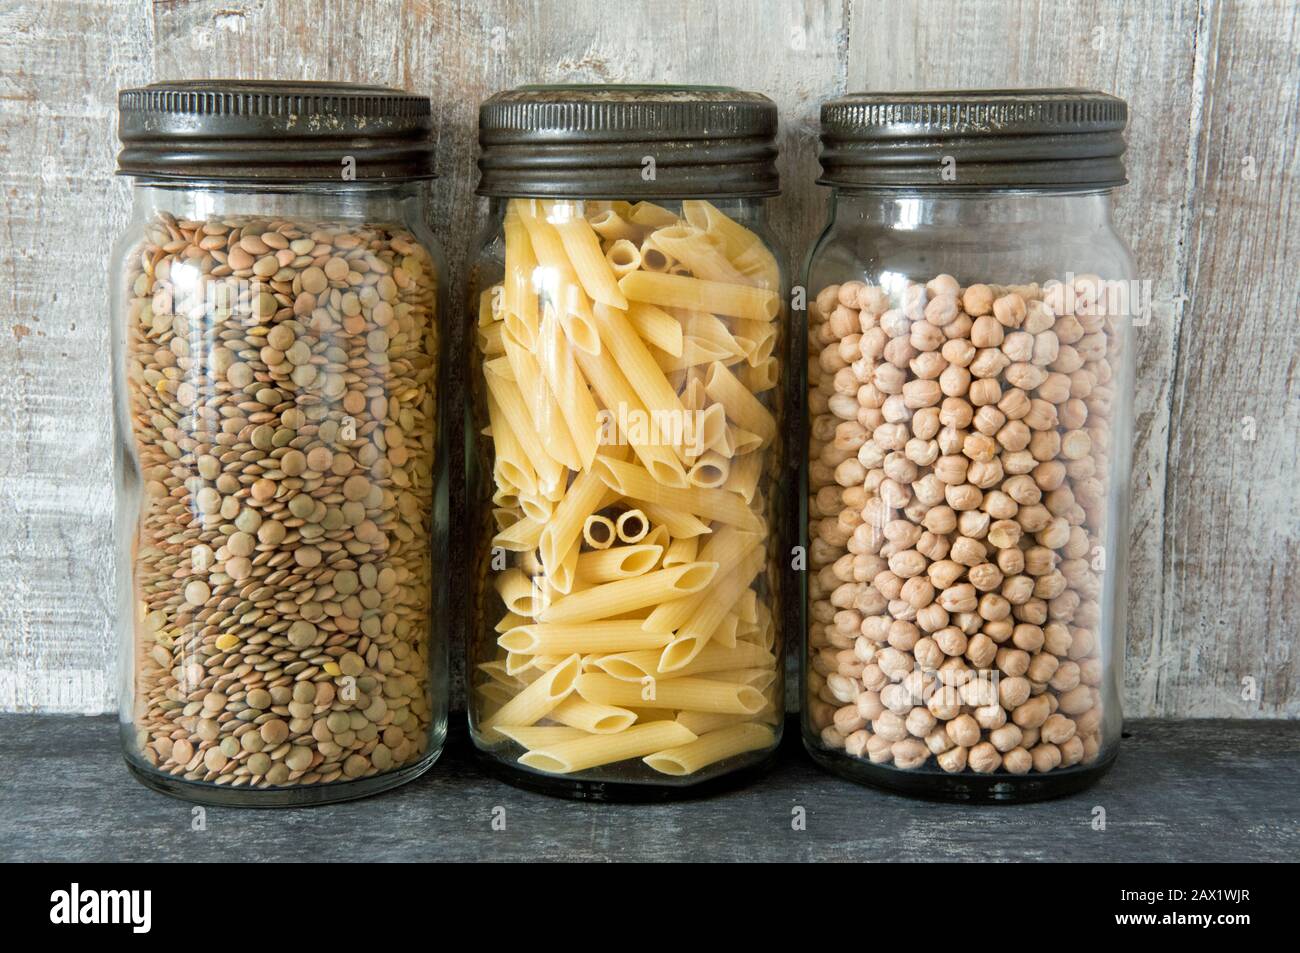 Vintage glass Kilner storage food jars with metal lids containing pasta, lentils and chickpeas against wooden background in kitchen.  Zero wastes concept Stock Photo